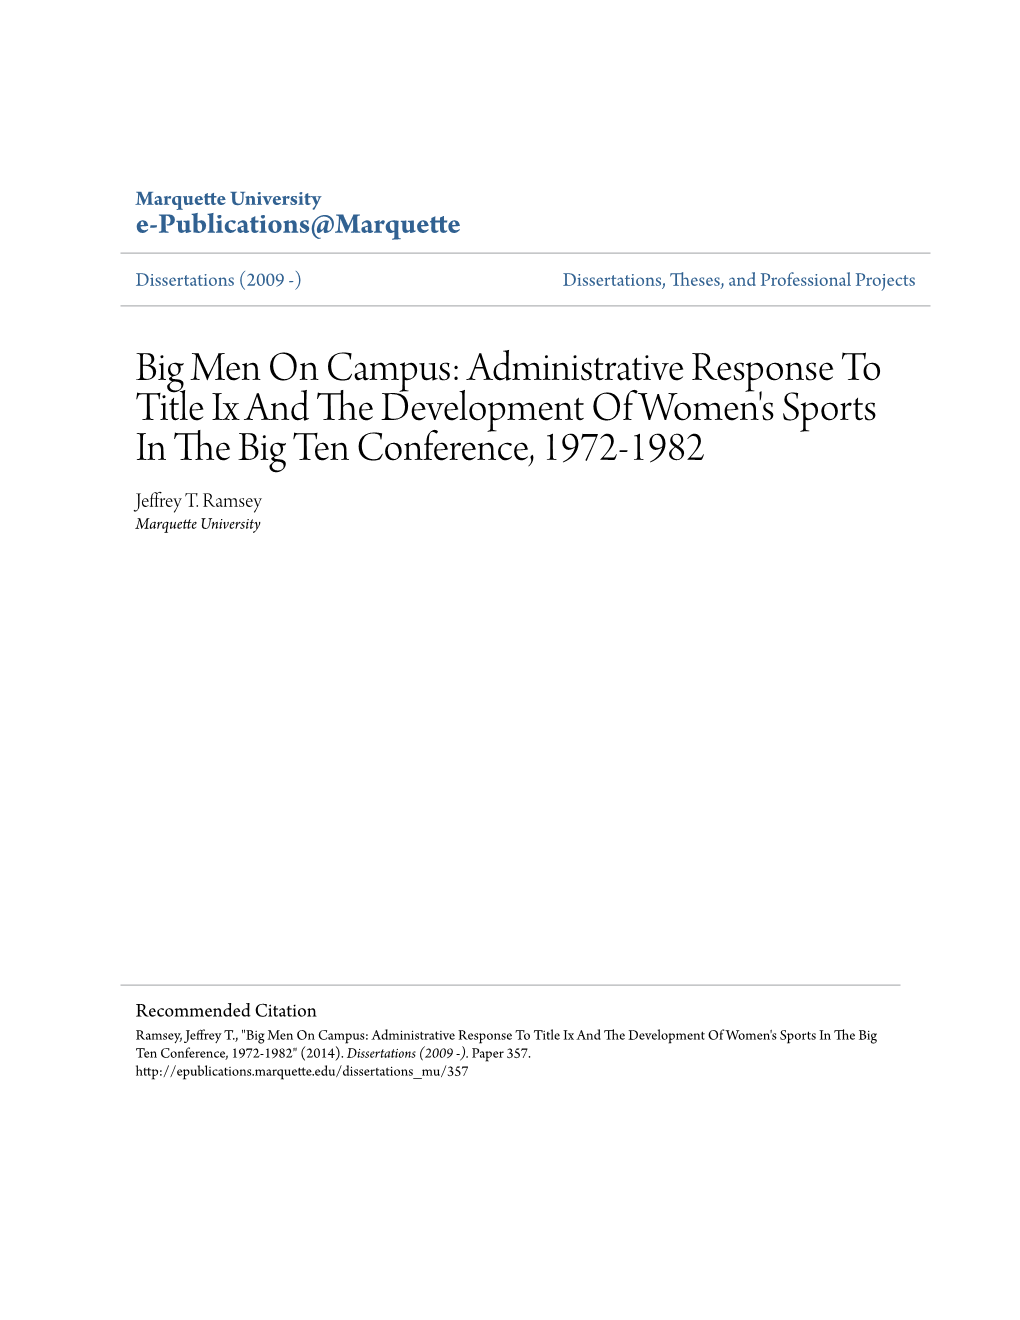 Administrative Response to Title Ix and the Development of Women's Sports in the Big Ten Conference, 1972